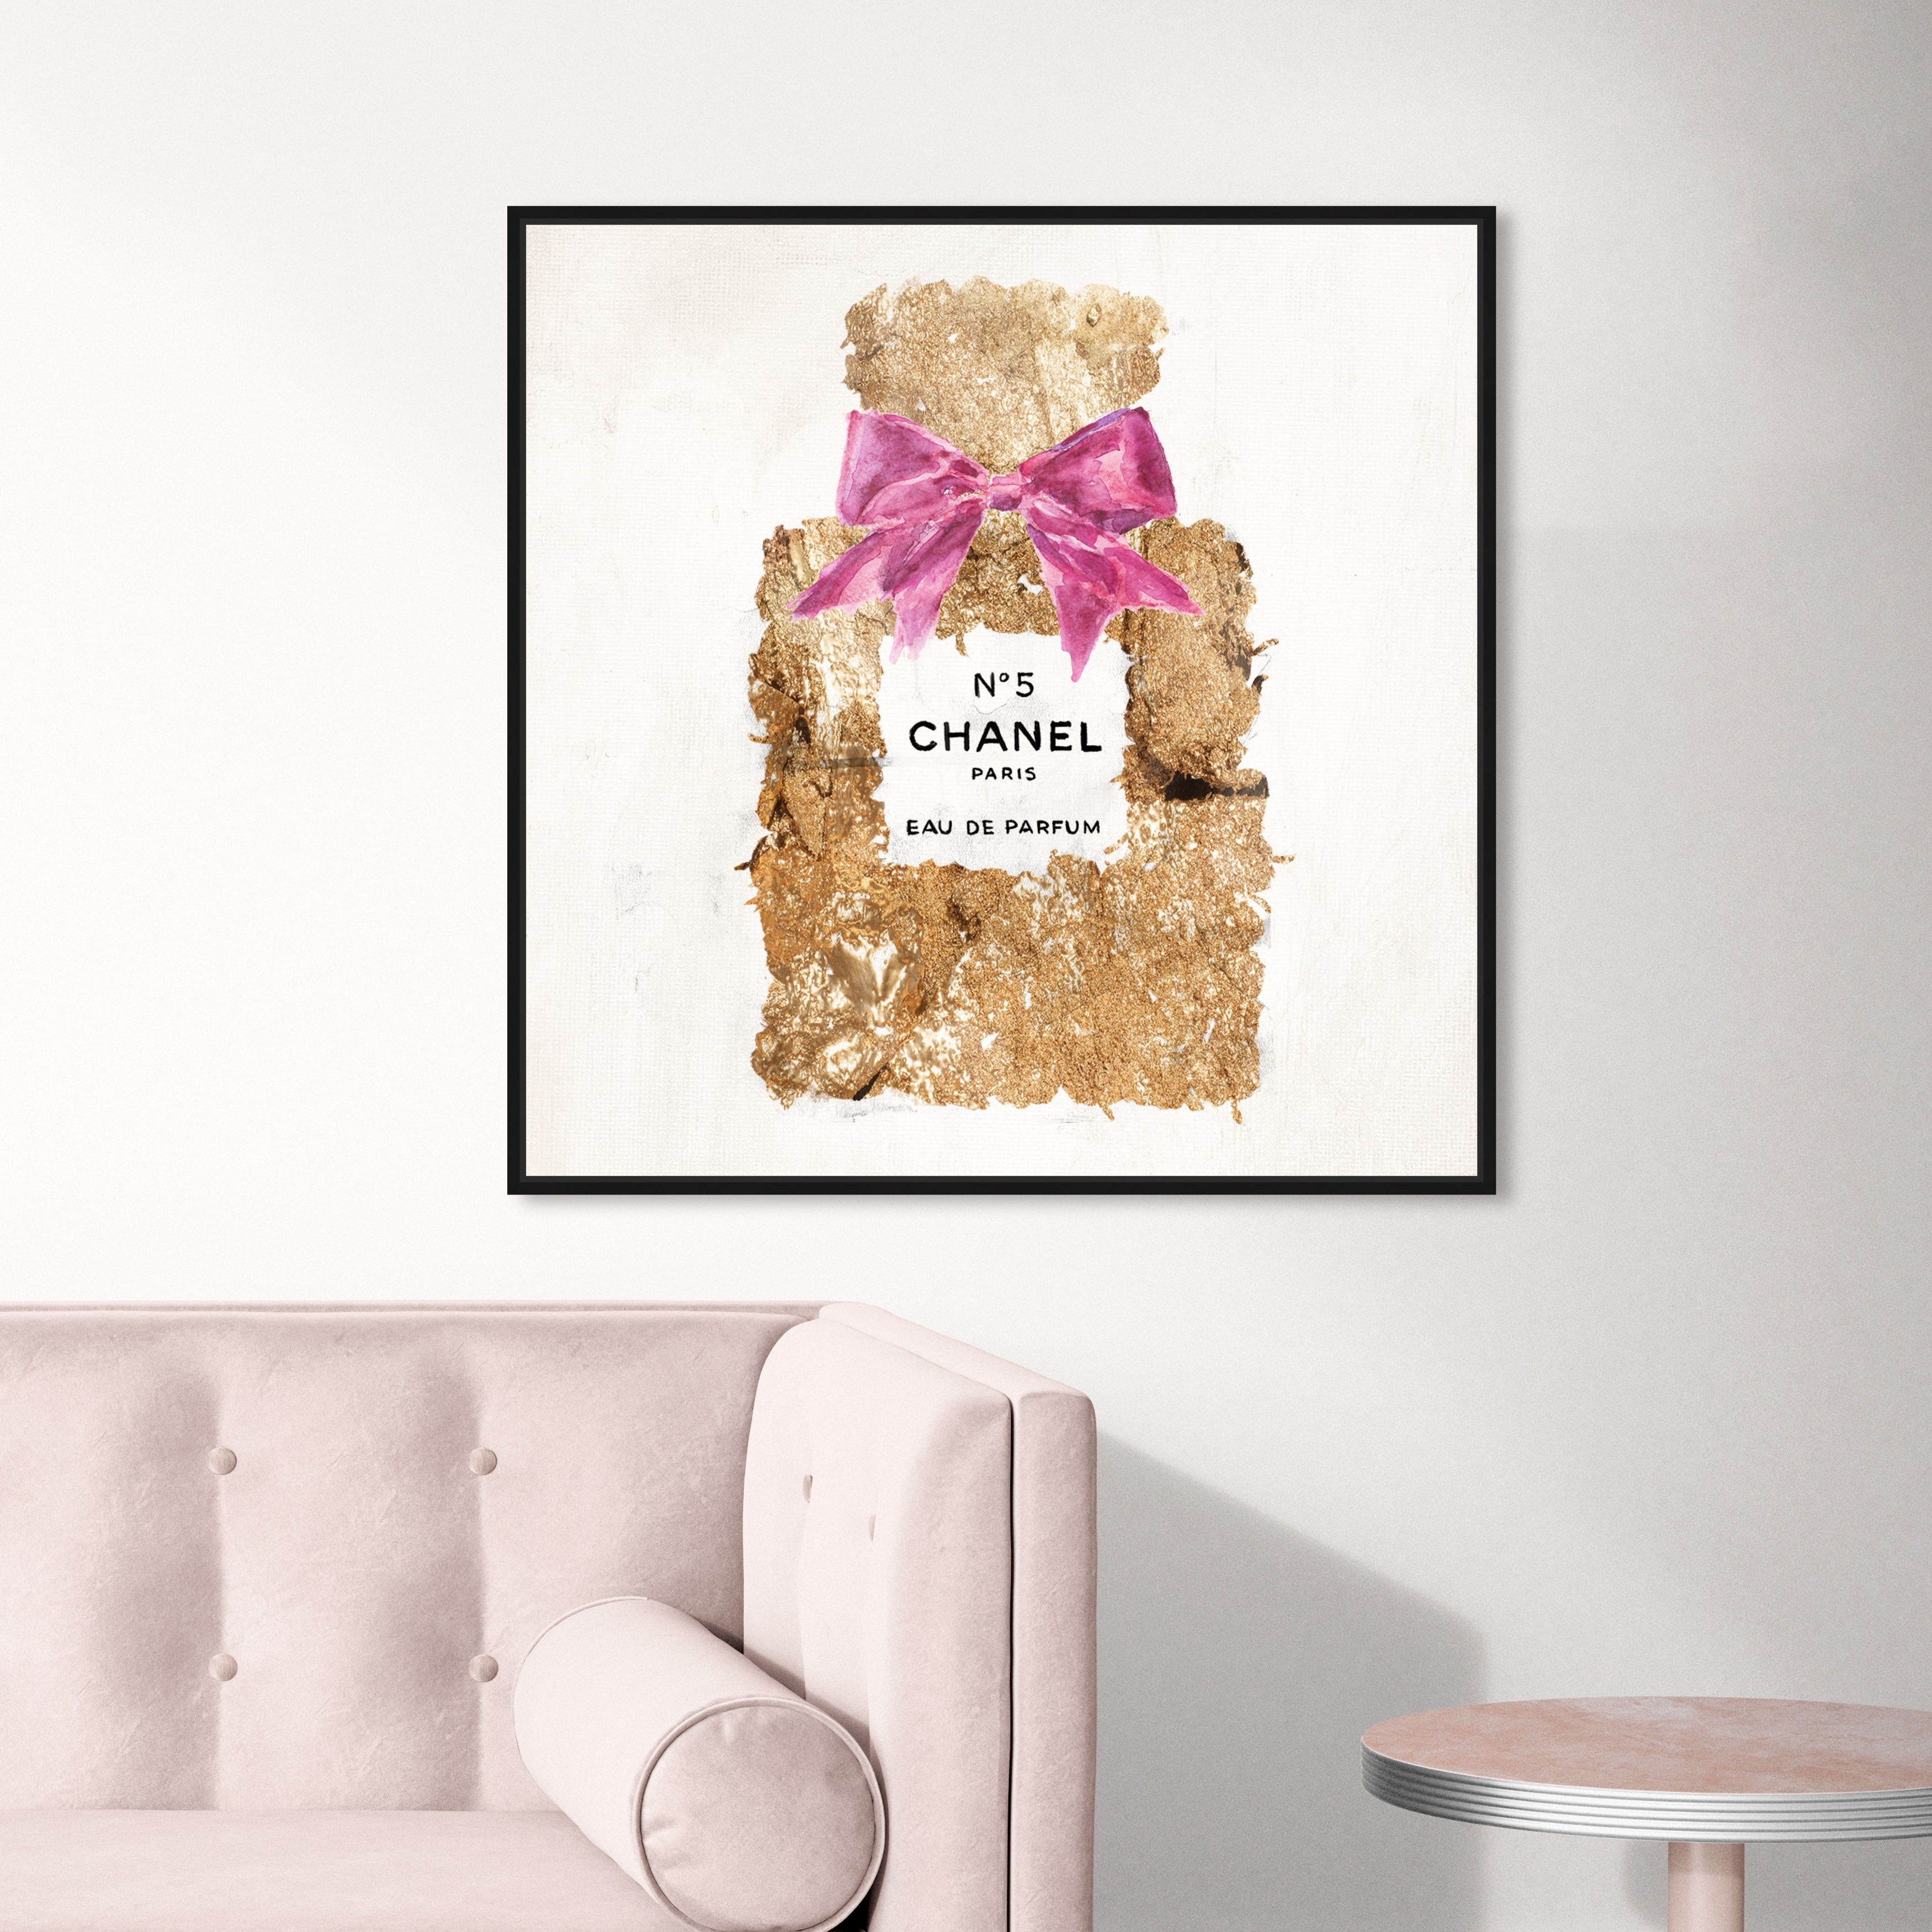 Oliver Gal 'Golden Perfume Collection' Glam Pink Wall Art Canvas Print -  Bed Bath & Beyond - 33075269